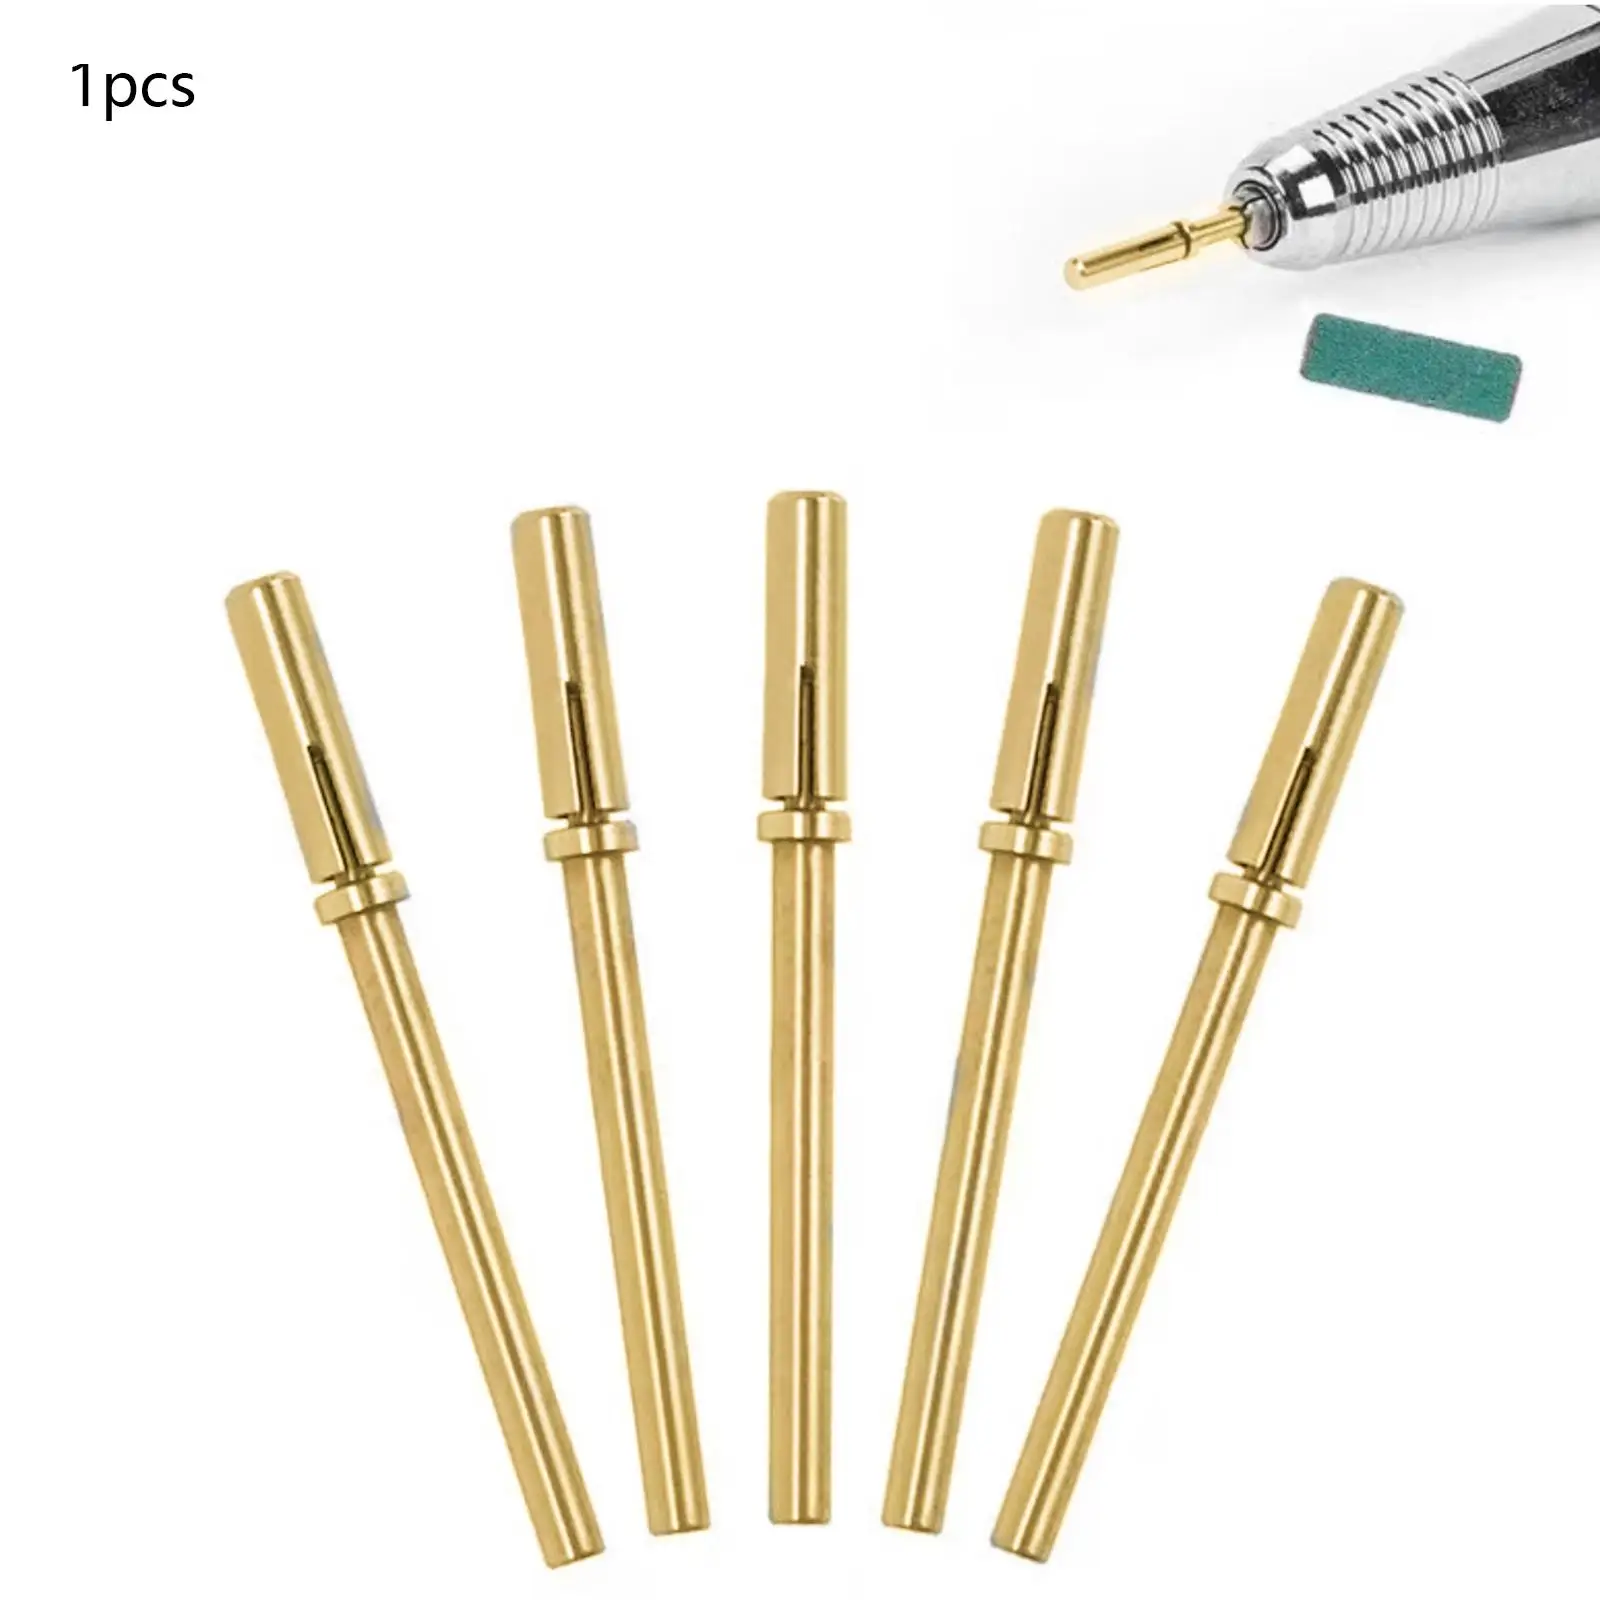 Nail Drill 3.1mm Nail Drill Heads for Electric File Manicure Pedicure Polishing Grinding Nail Art Salon Nail Sanders